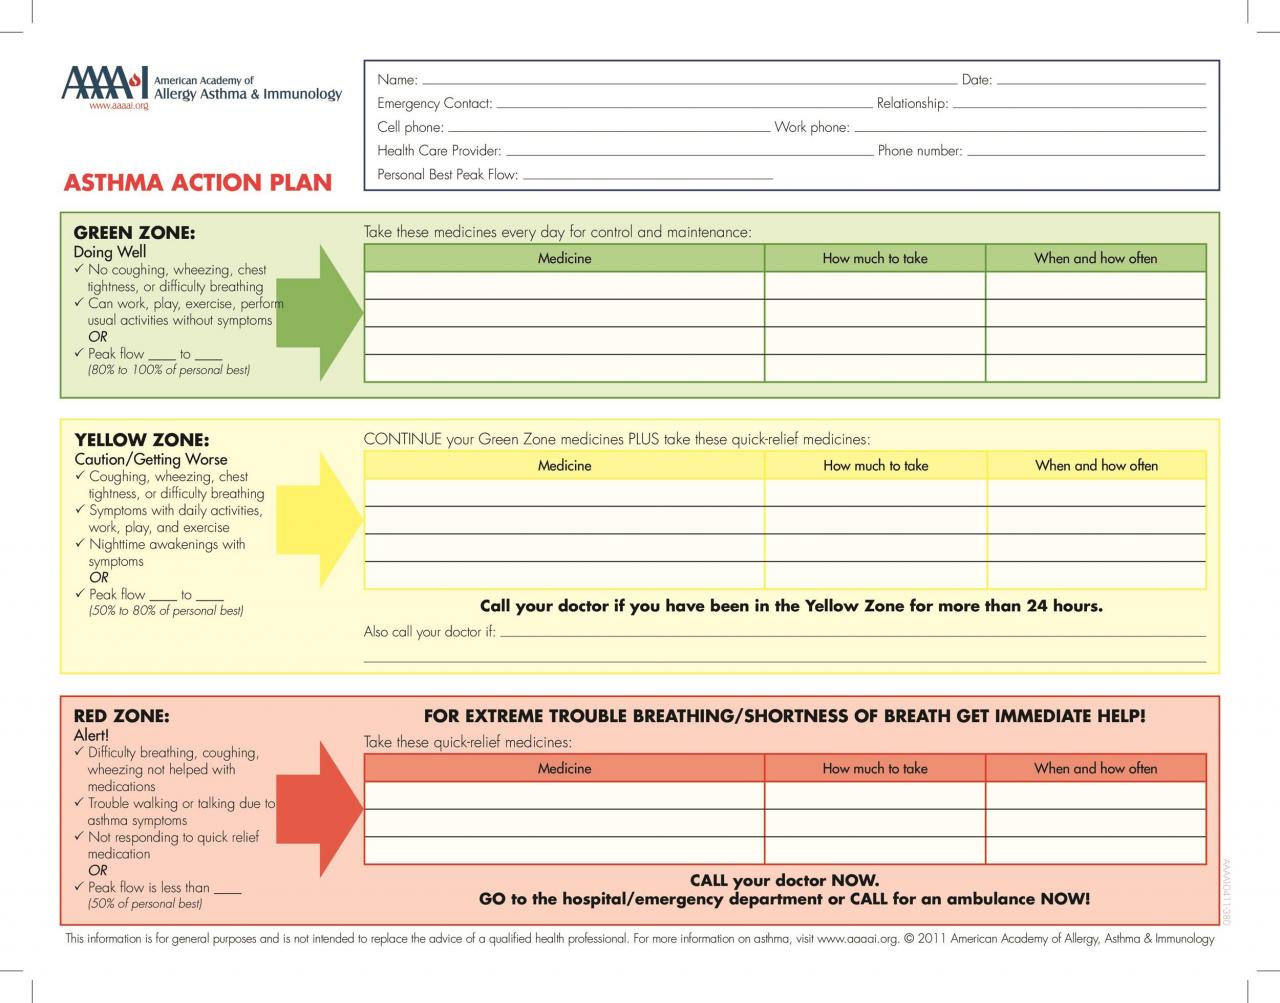 An action plan is best defined as the plan